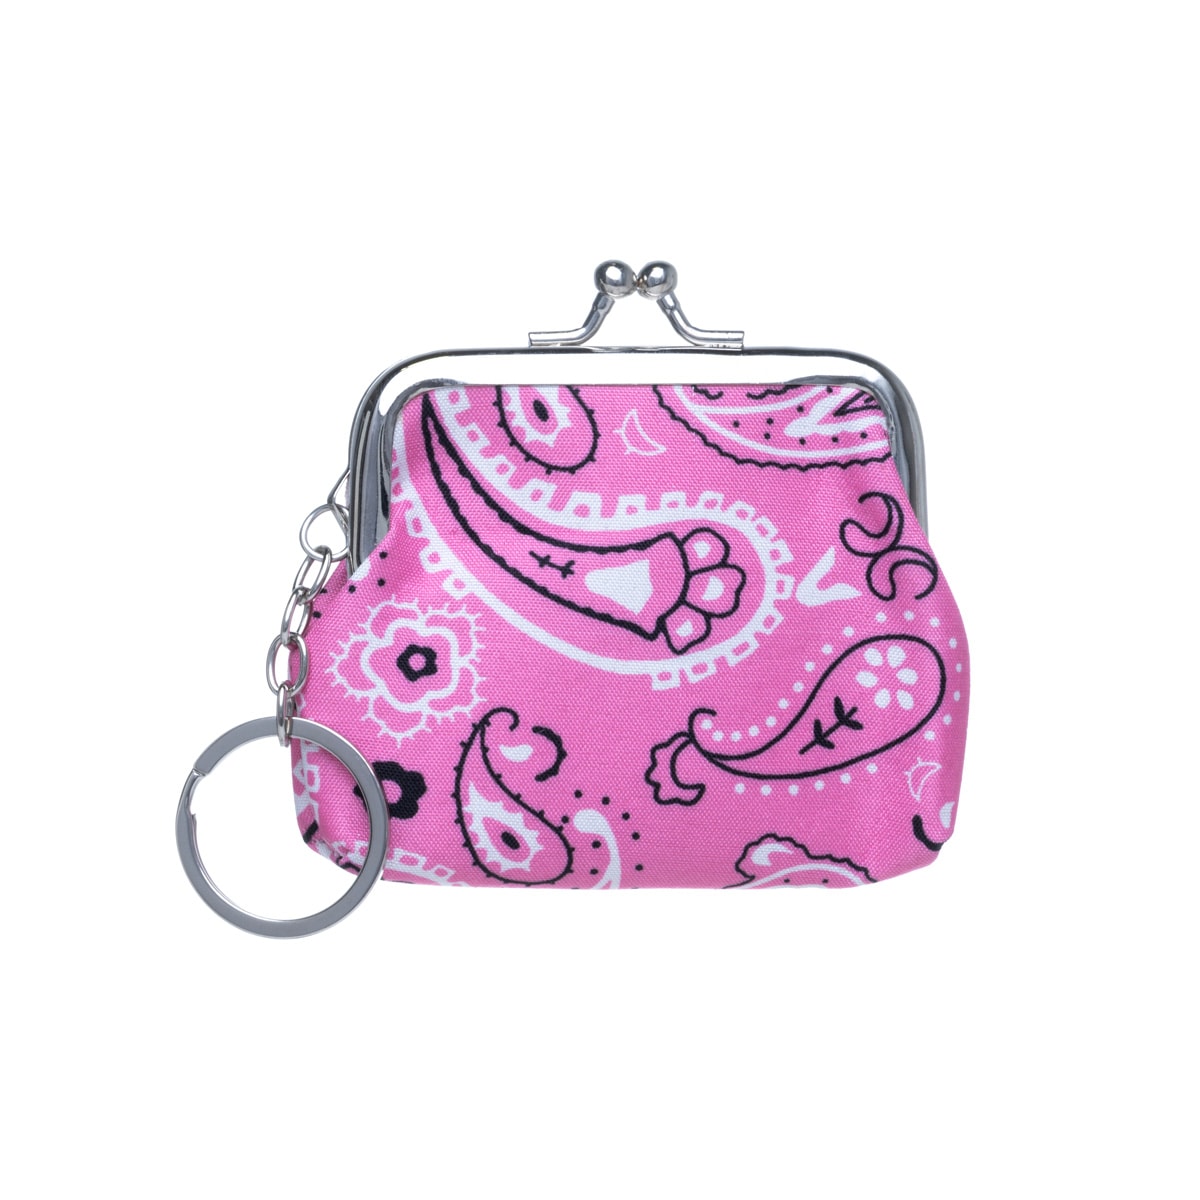 Paisley pattern coin pouch keyring